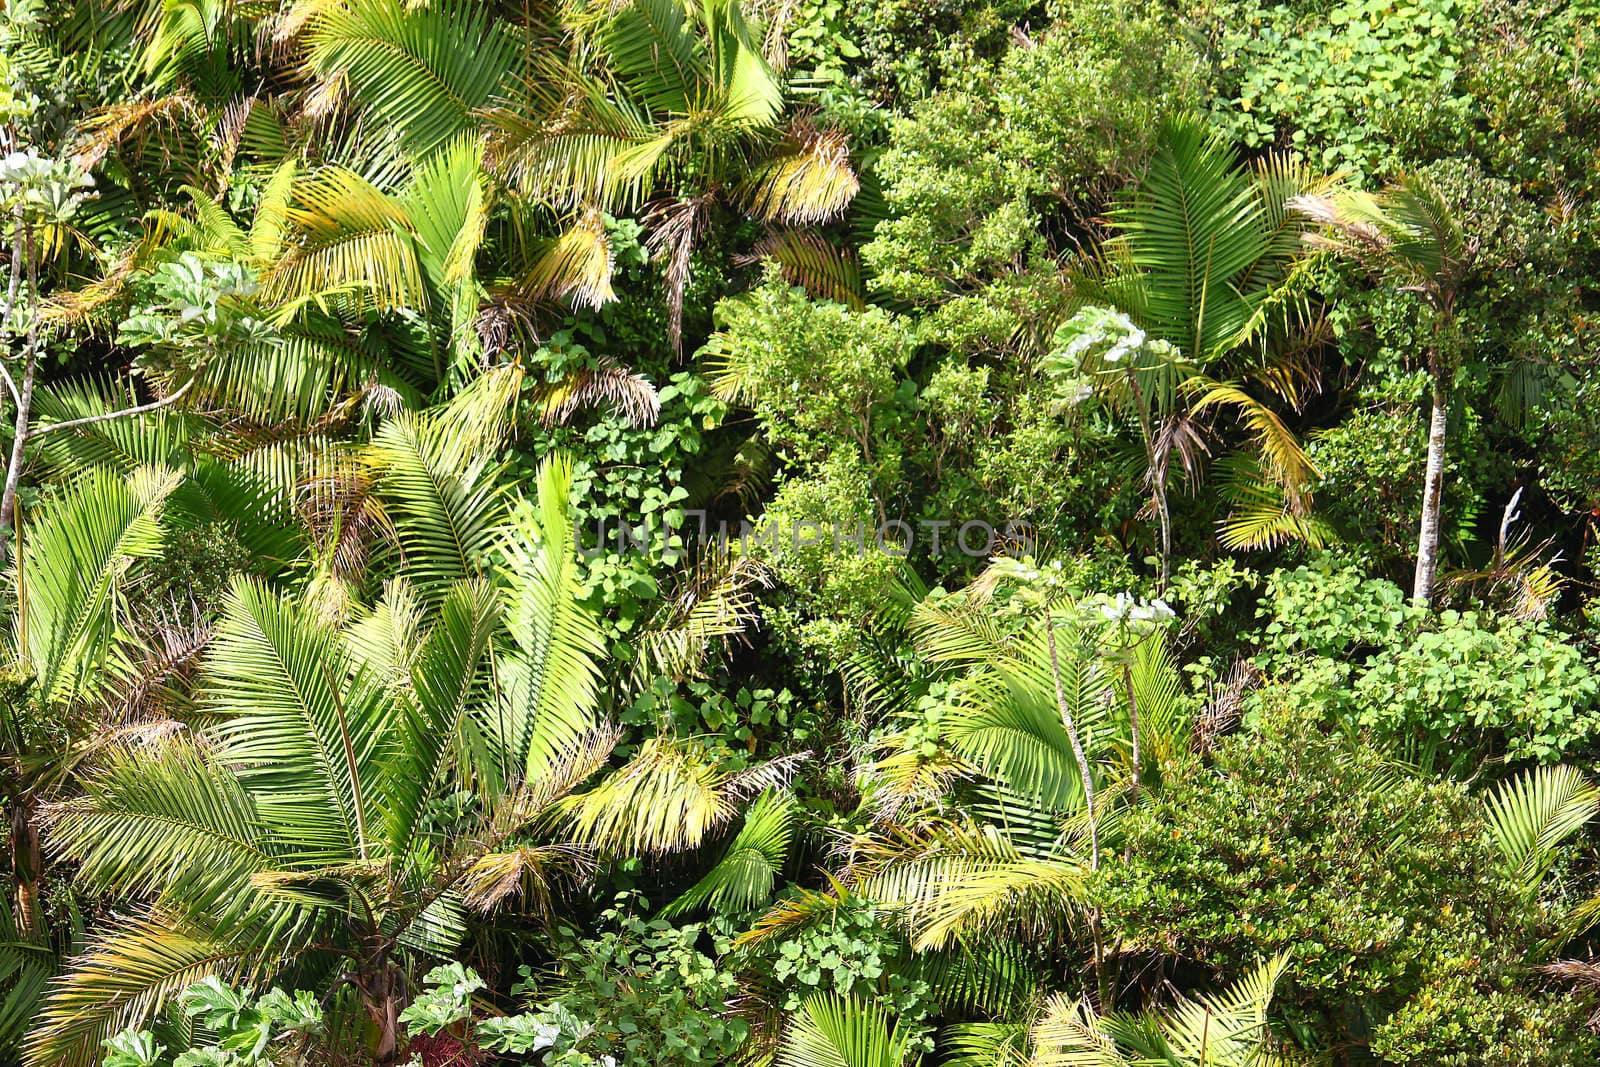 Overhead view of tropical vegetation at El Yunque National Forest in Puerto Rico.